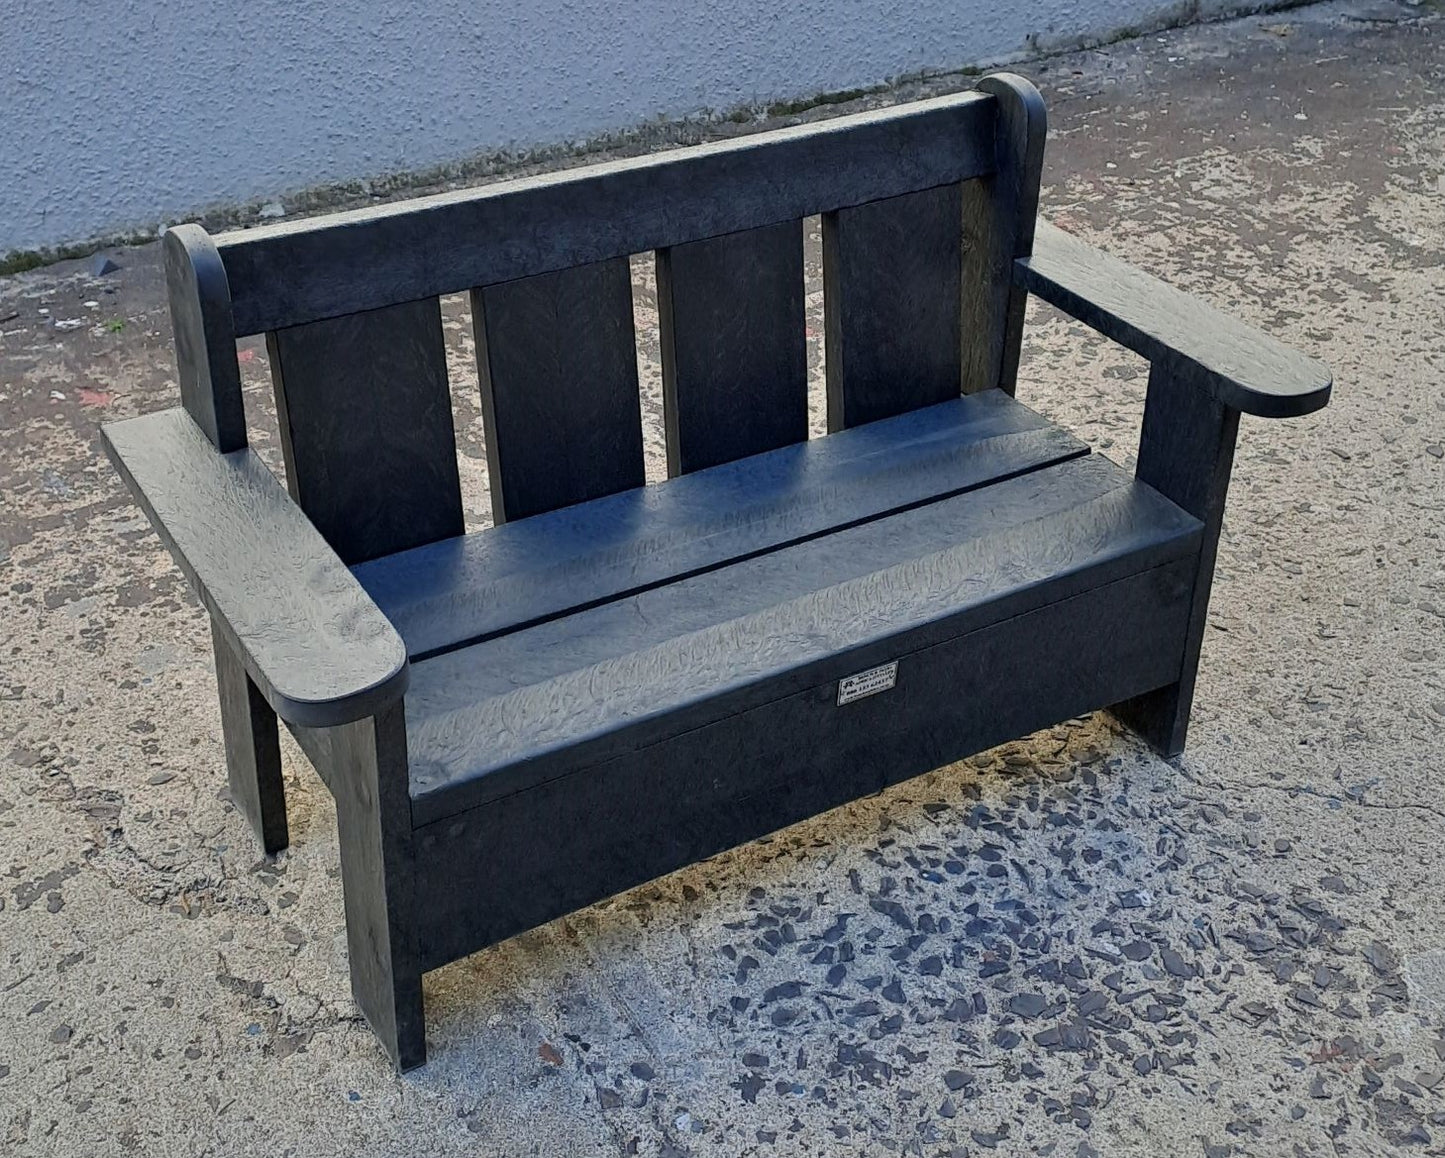 RECYCLED PLASTIC "BUDDY BENCH"